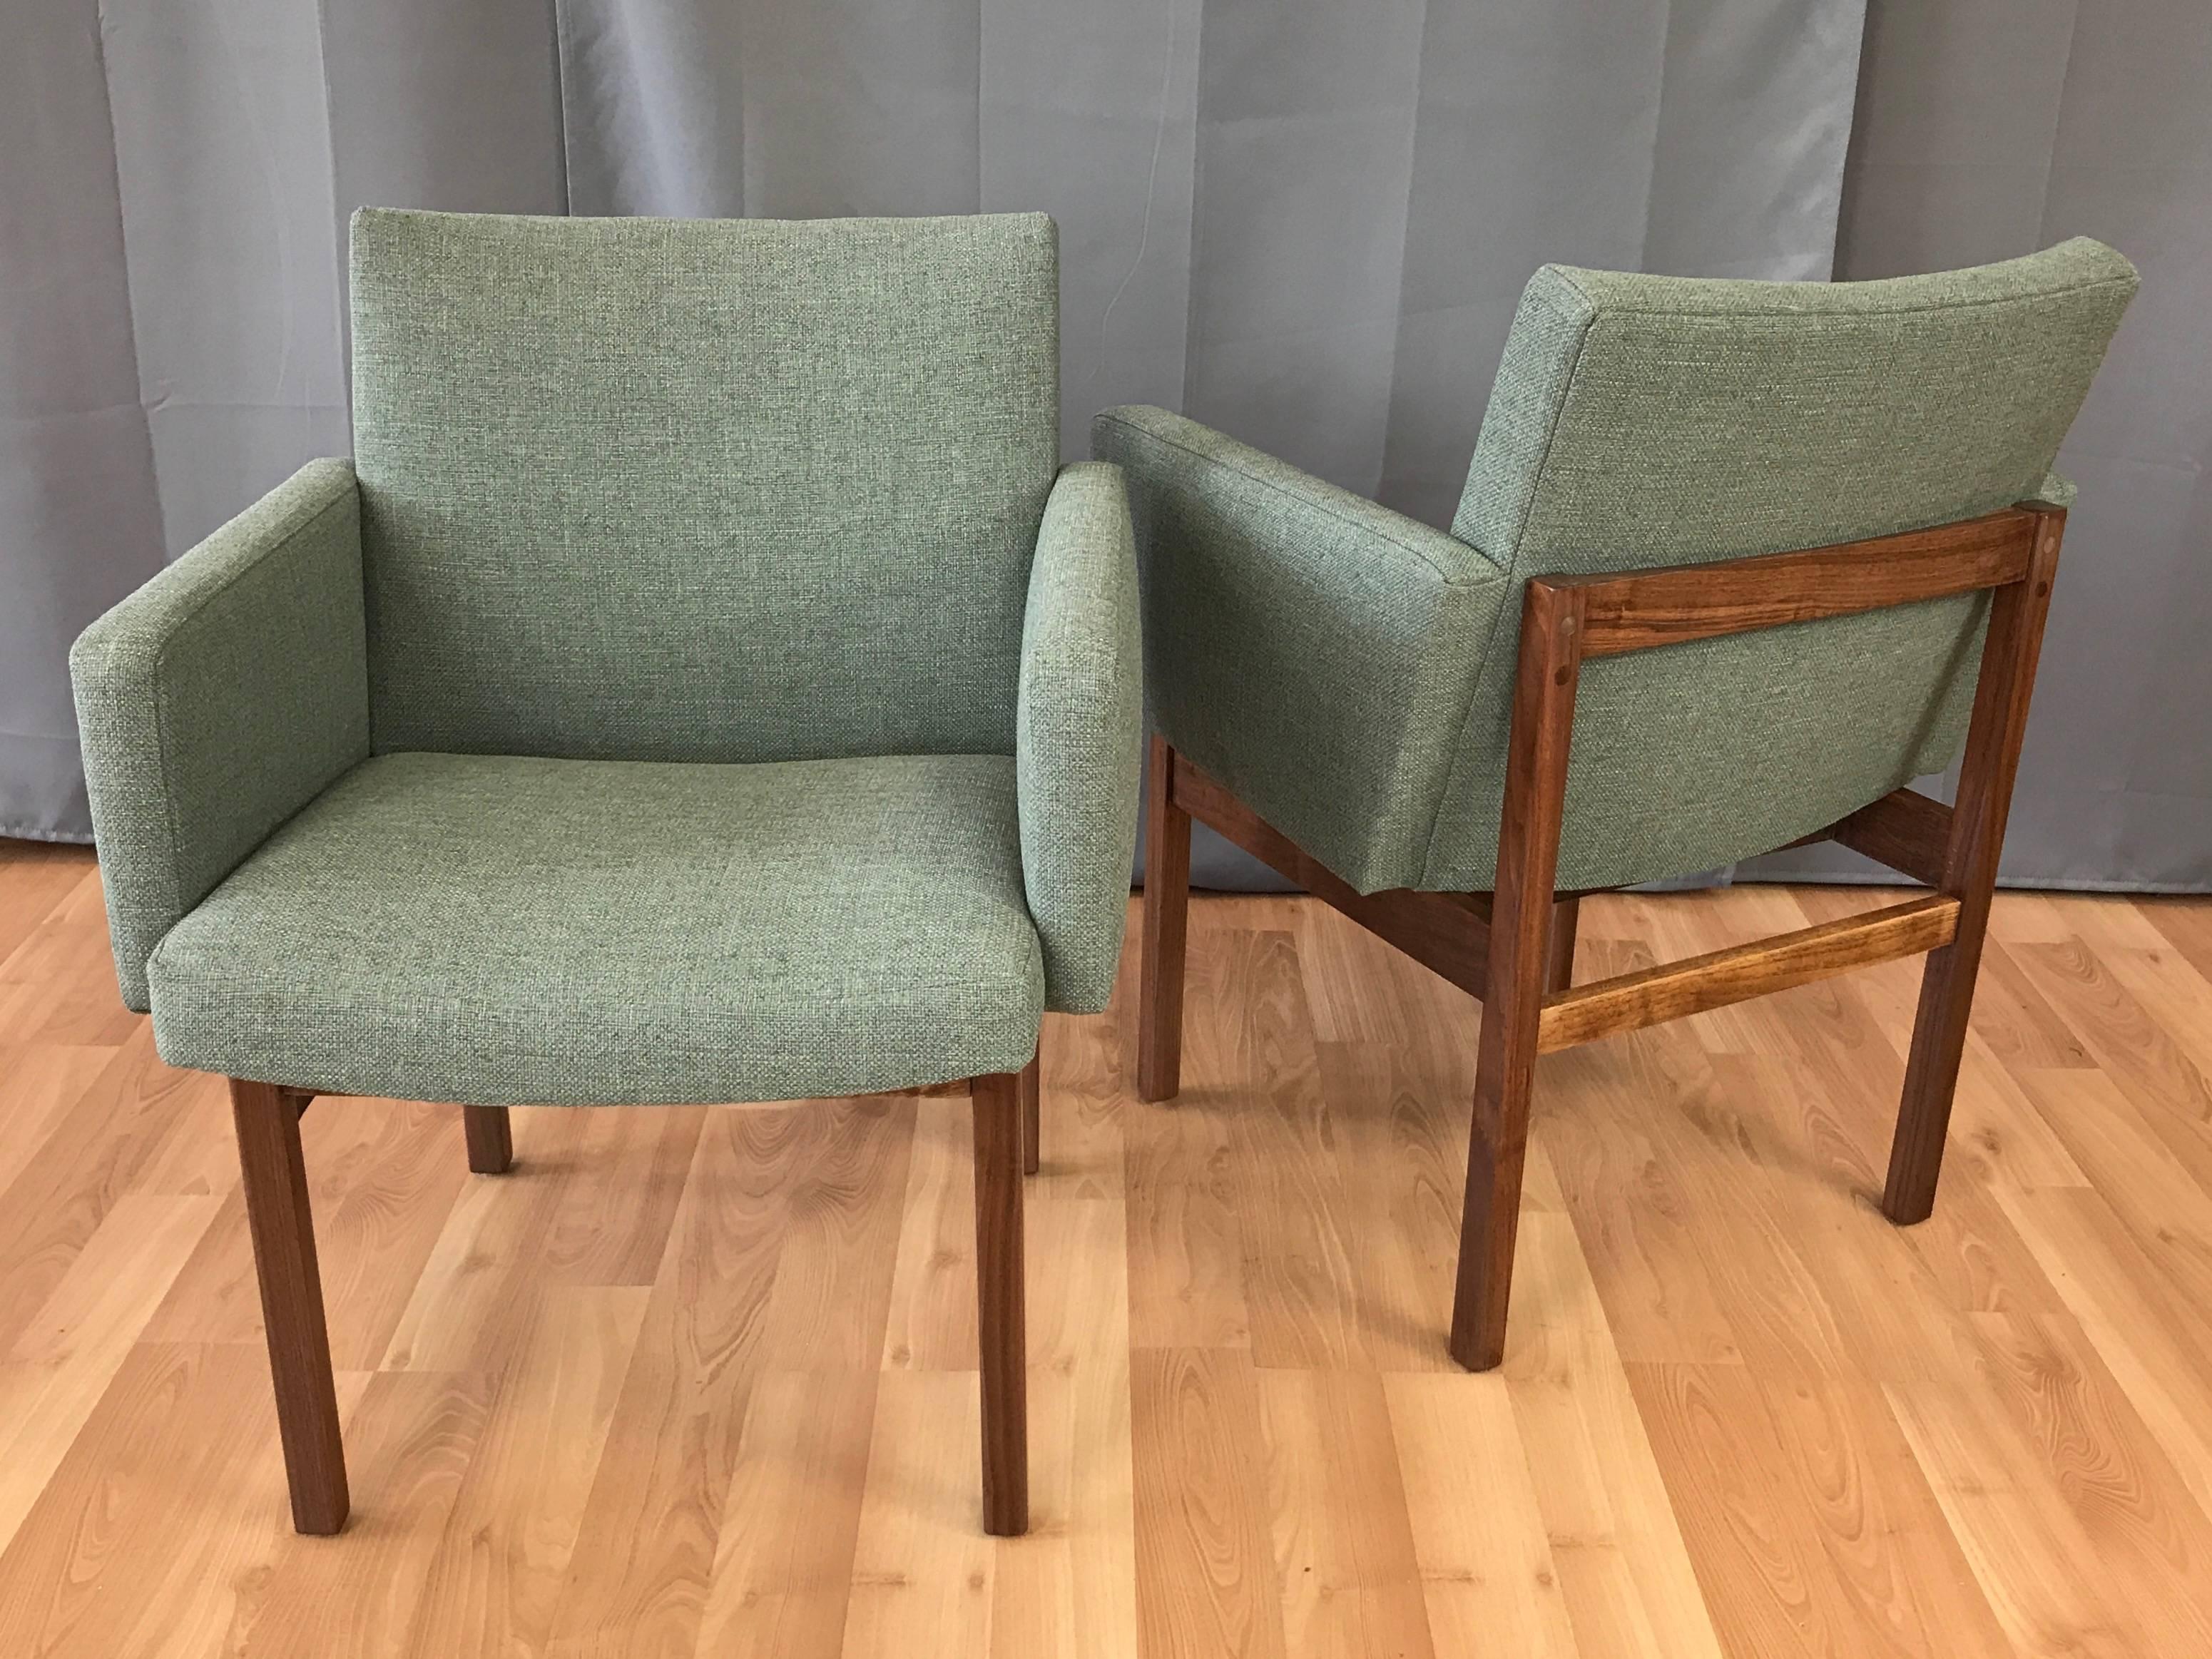 Upholstery Pair of Midcentury Walnut Lounge Chairs Attributed to Jens Risom